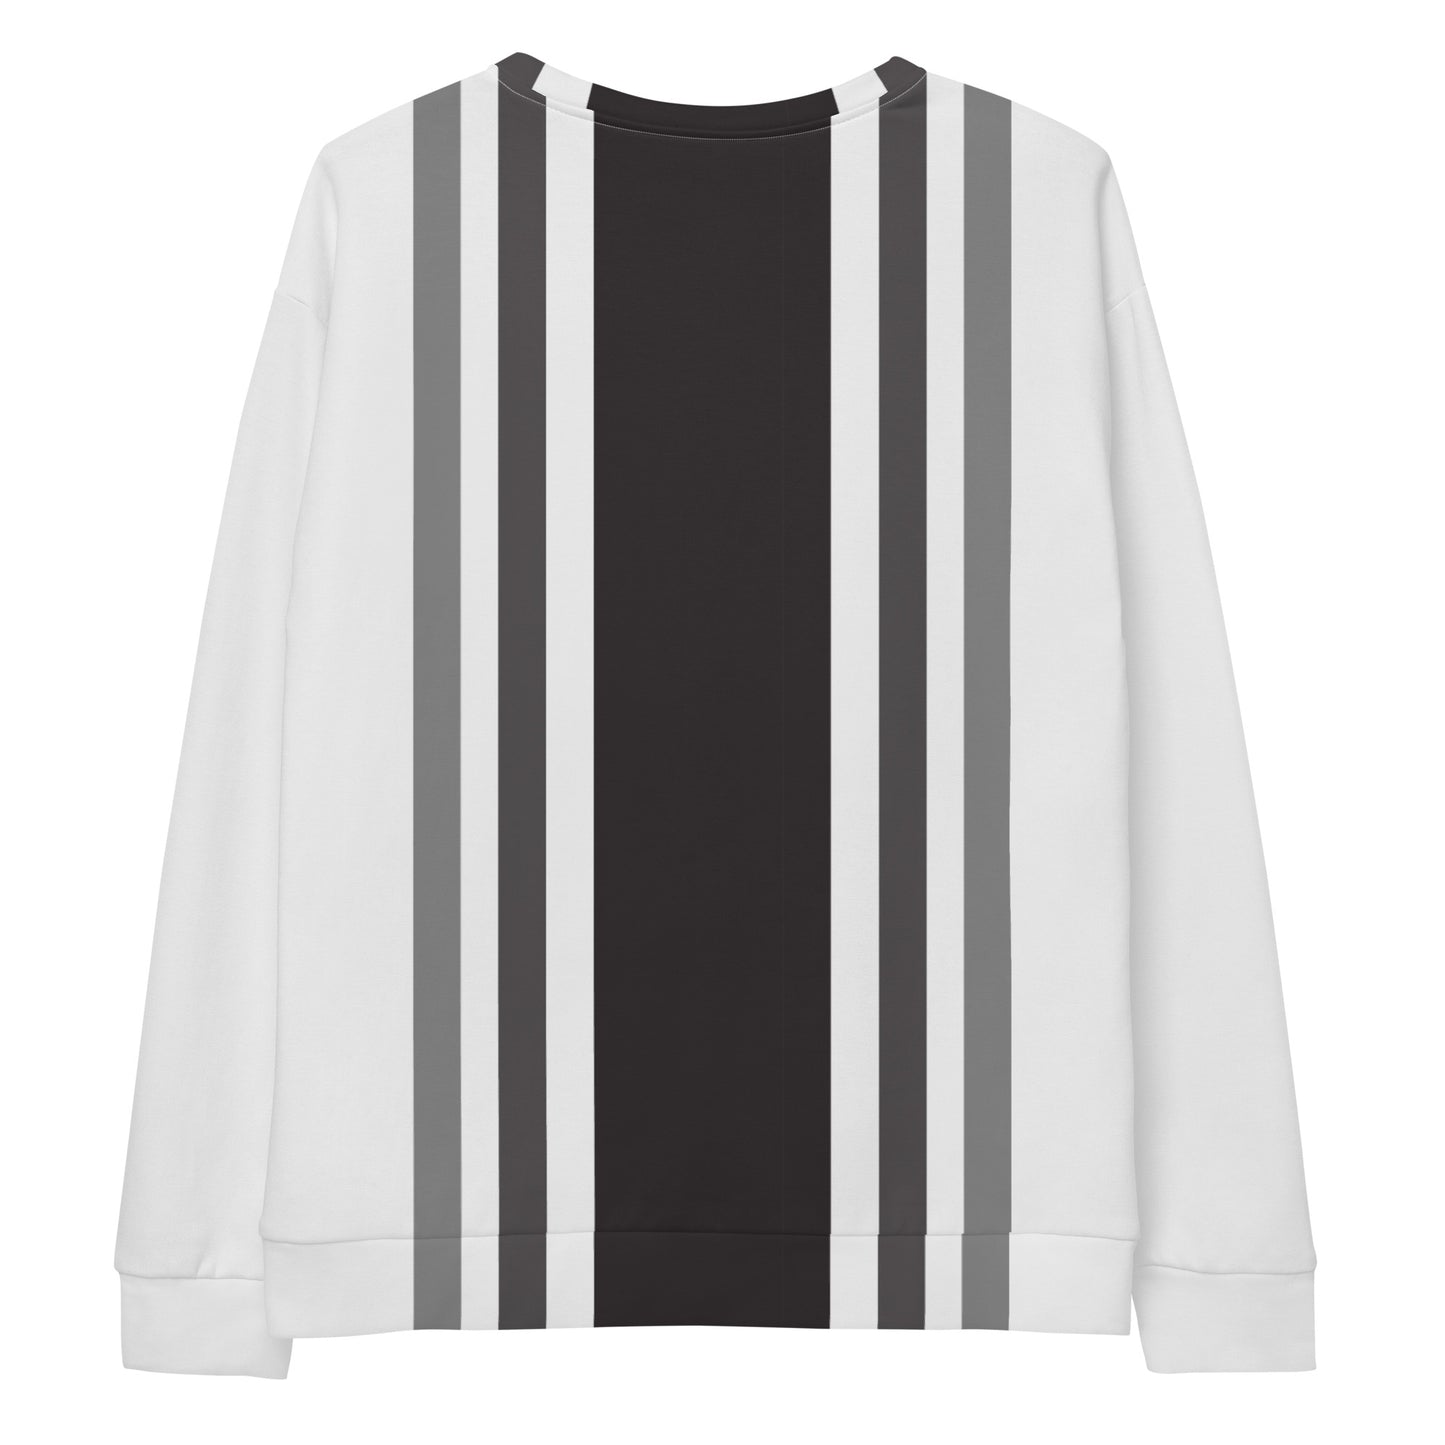 Vertical Lines Charcoal - Sustainably Made Sweatshirt